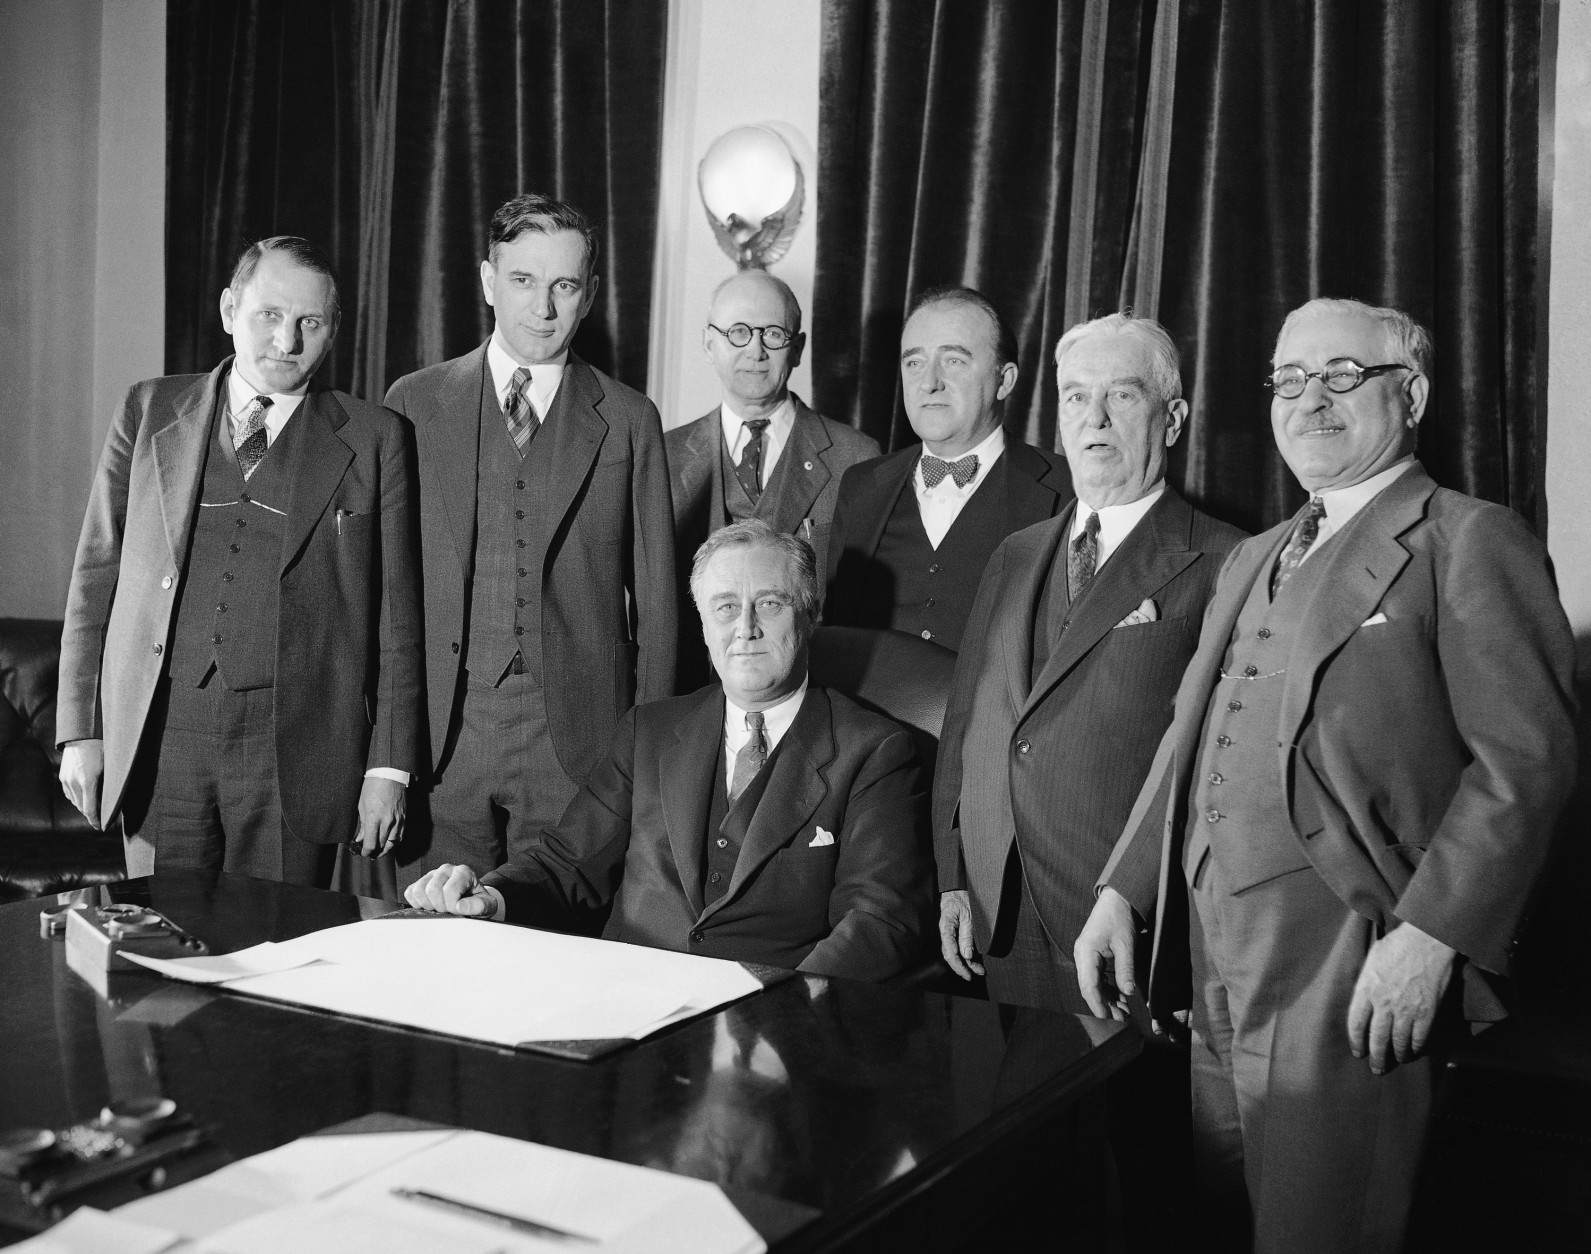 President Franklin D. Roosevelt signed the Cullen-Harrison Act, or &quot;Beer Bill&quot;, March 22, 1933, which will permit the sale of beer and wine containing 3.2% alcohol starting April 6.  He is seen with the Congressional sponsors of the bill, from left to right:  Representatives Claude V. Parsons of Illinois and John McCormack of Massachusetts; H.V. Hesselman, clerk in charge of enrolling bills; Representatives John Joseph O'Connor and Thomas Henry Cullen of New York; and Adolph Sabath of Illinois.  (AP Photo)